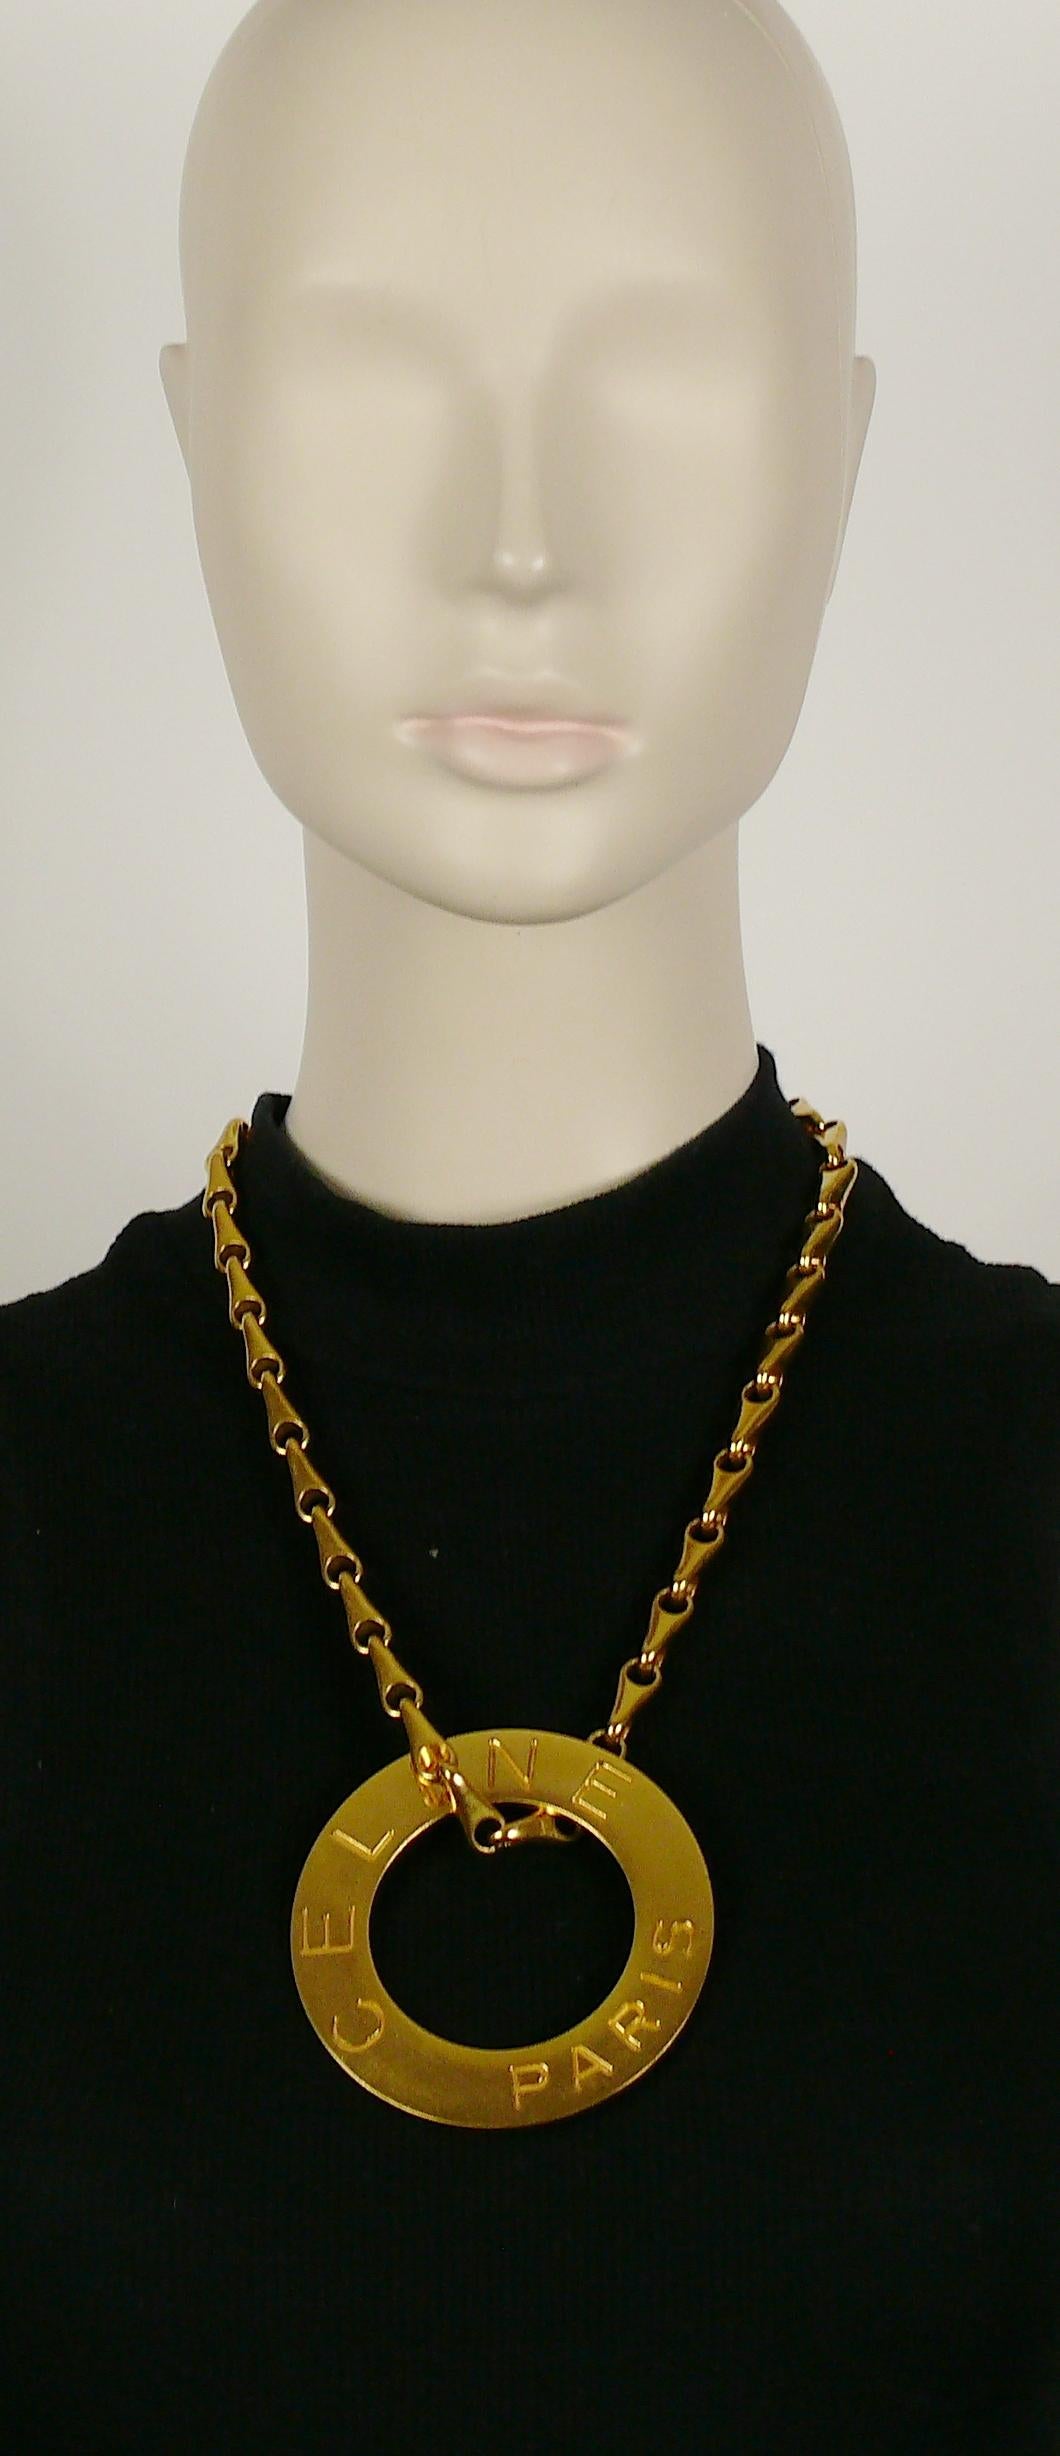 CELINE vintage 1990 gold toned chunky chain featuring a massive disc pendant embossed CELINE PARIS.

Secure clasp closure.

Embossed CELINE PARIS on the clasp.
Embossed CELINE PARIS 90 MADE IN ITALY on the reverse of the pendant.

Indicative